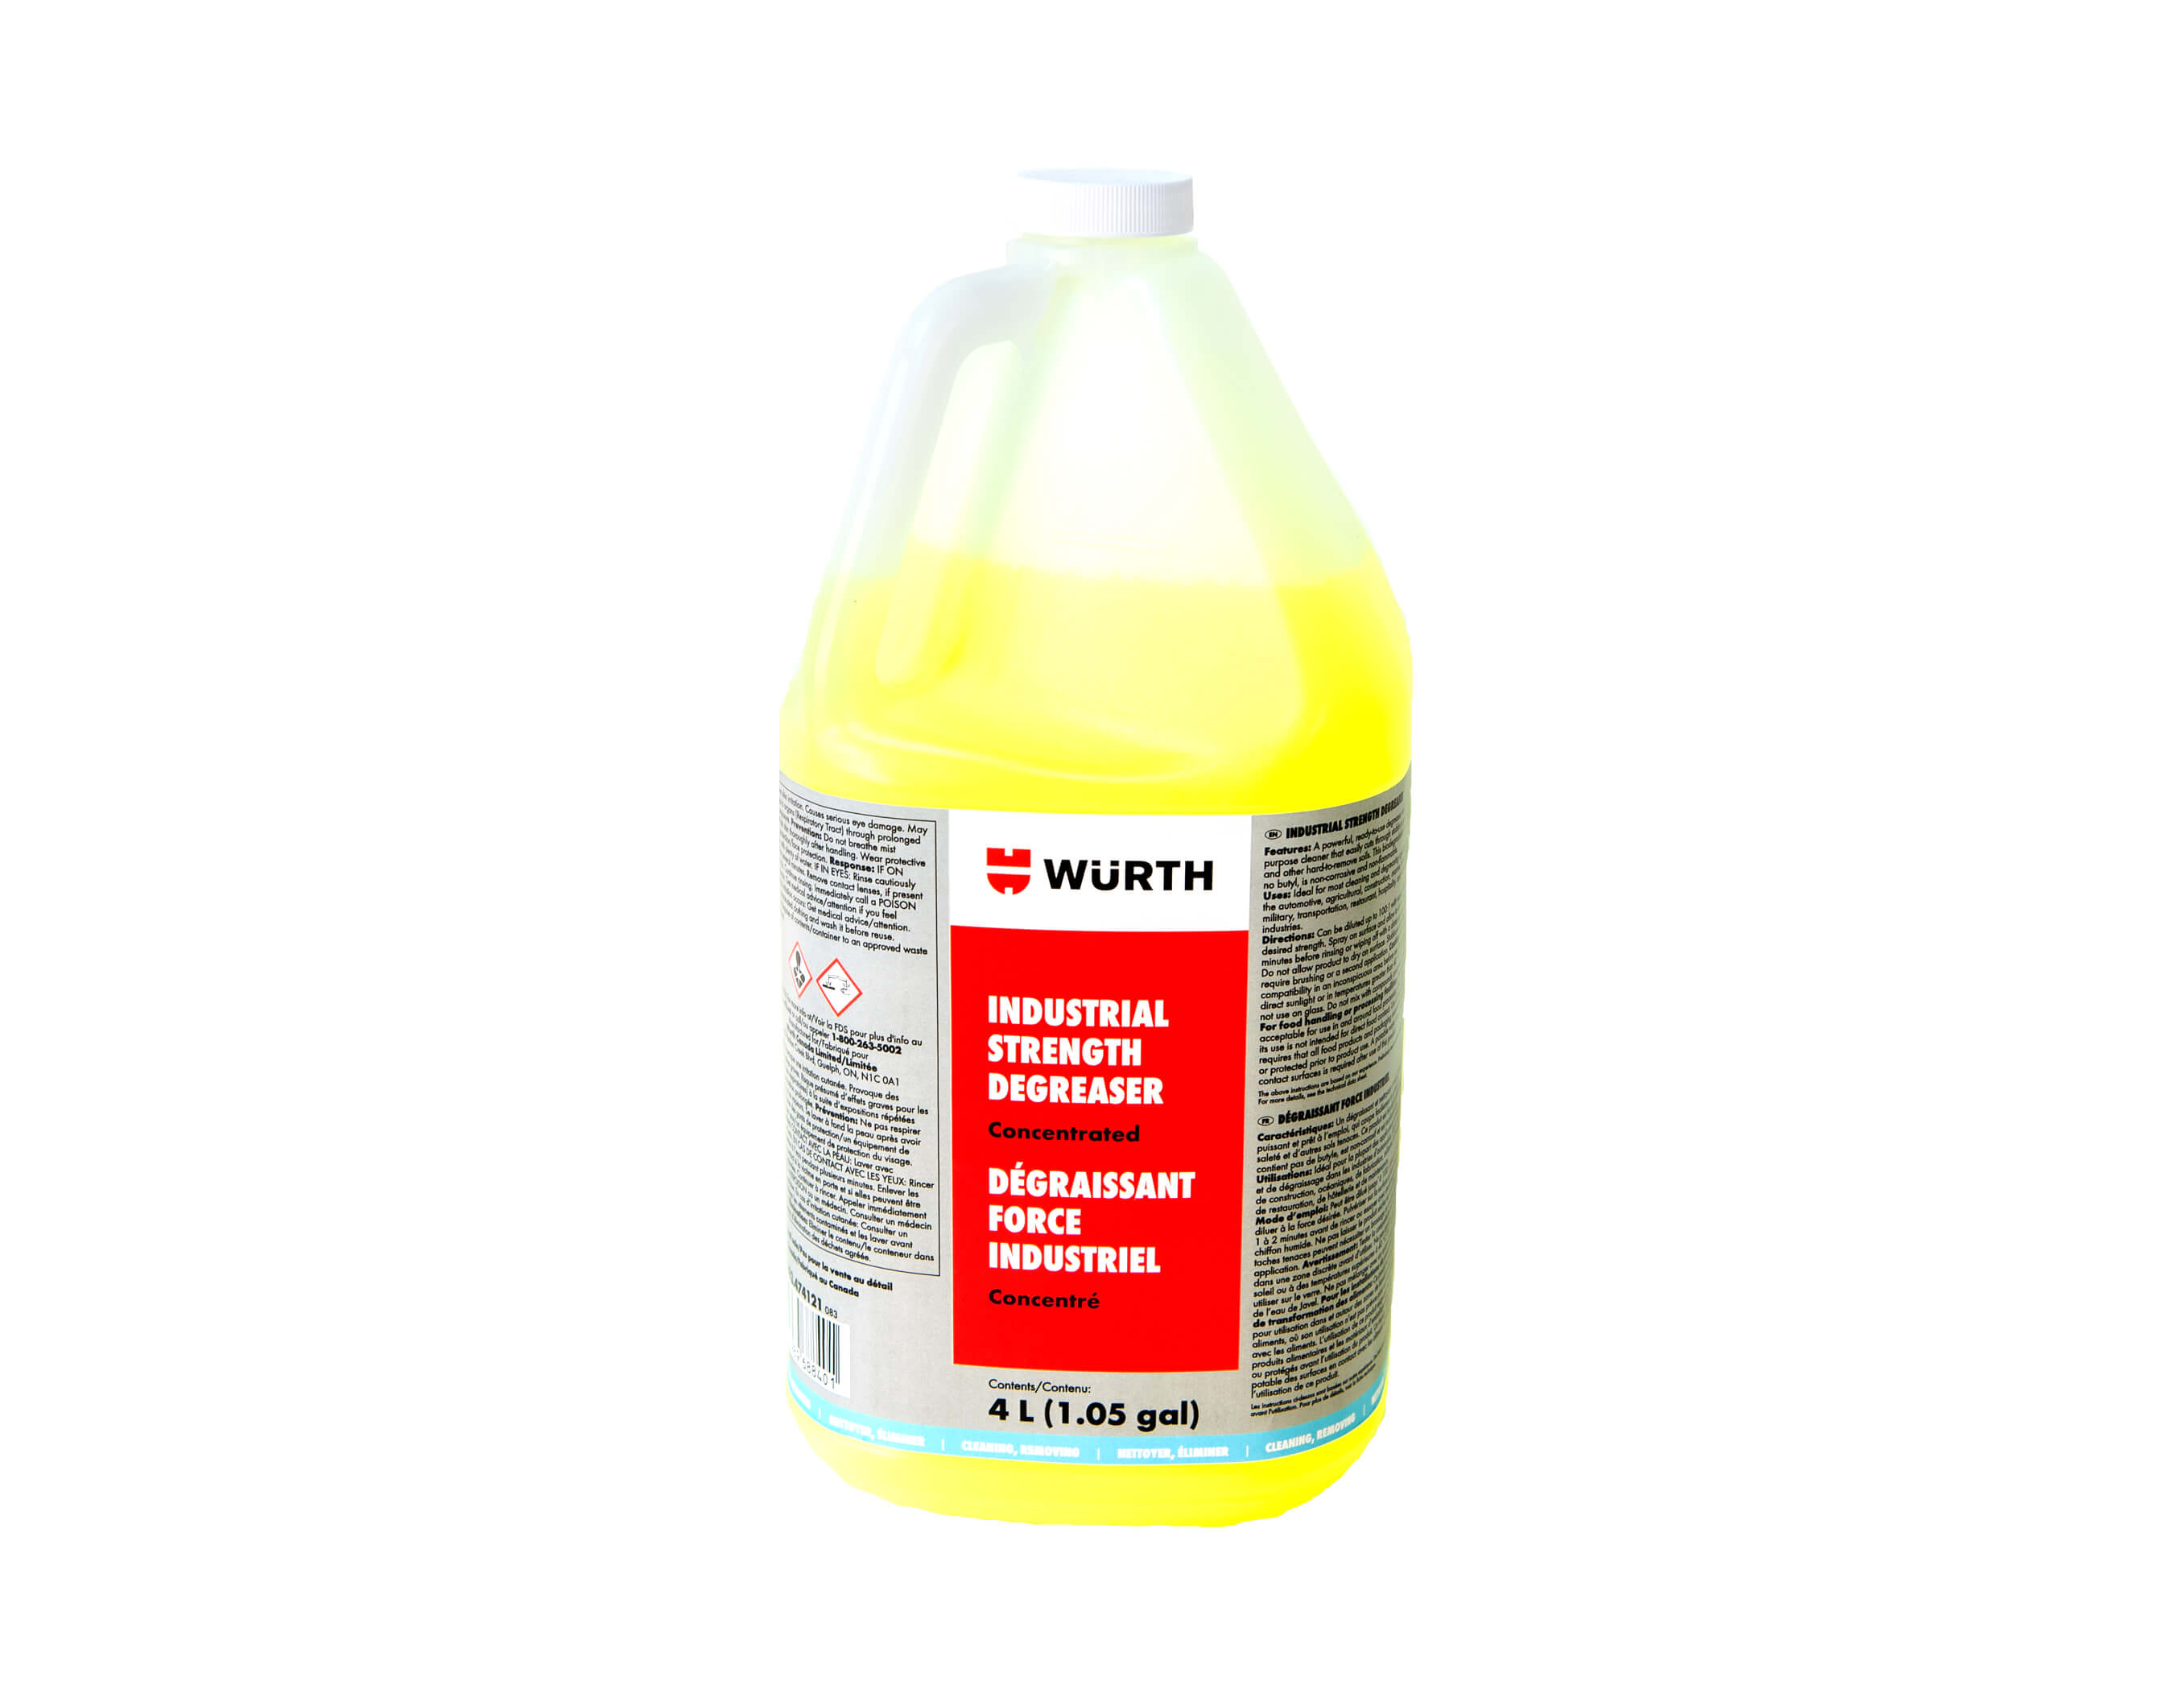 INDUSTRIAL STRENGTH DEGREASER 4 L